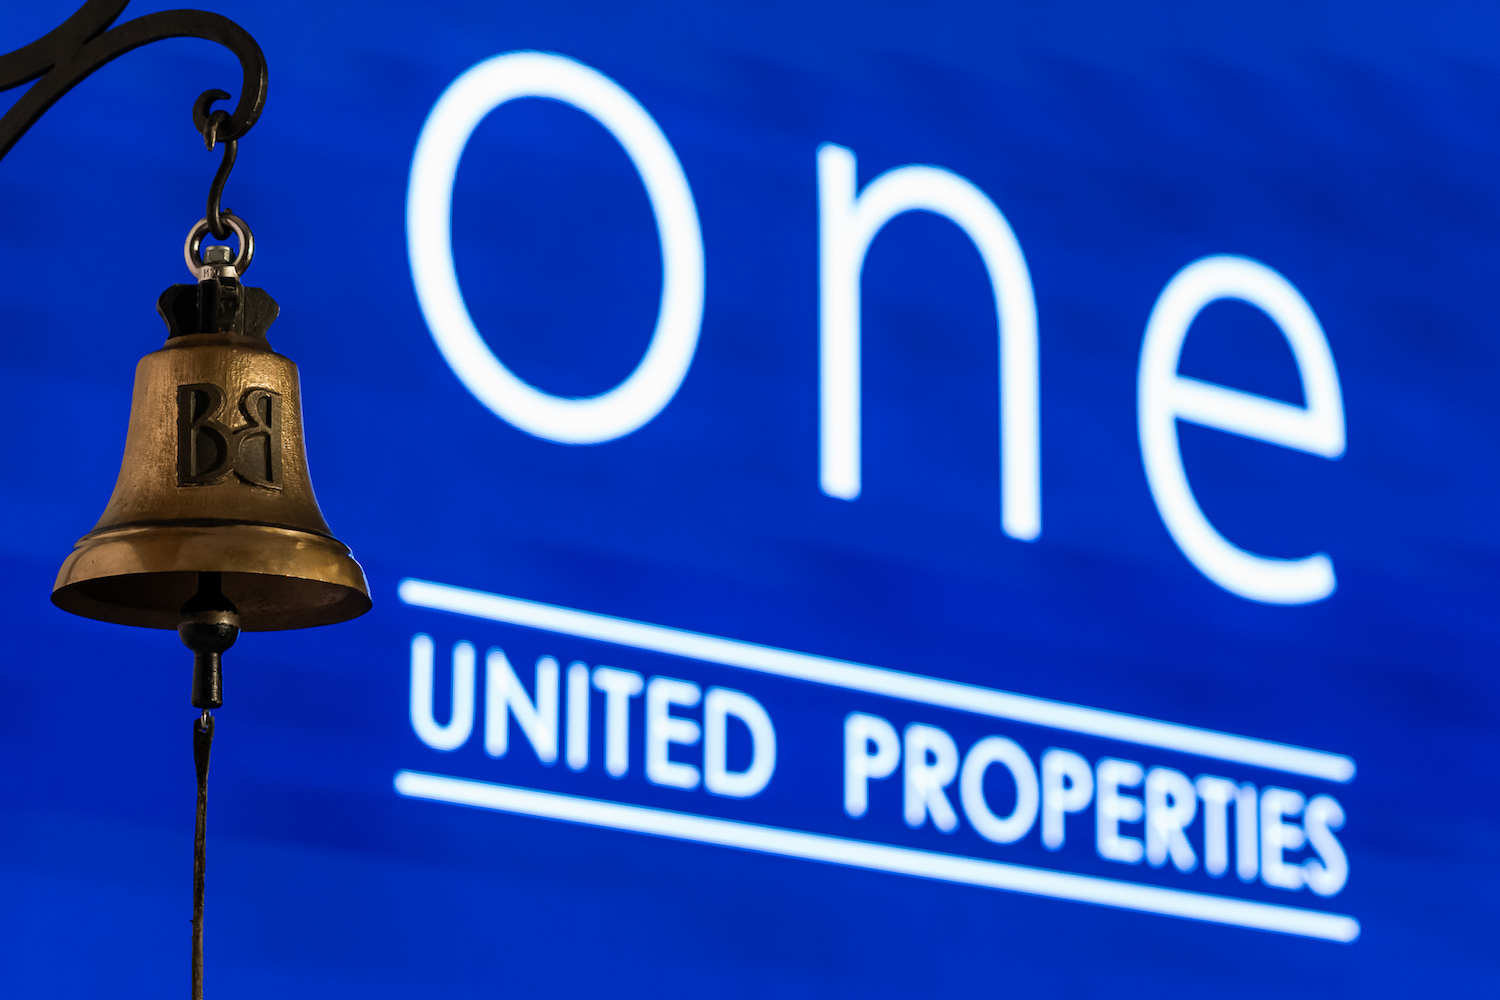 One United founders sell 6.4% stake to accommodate global institutional investors